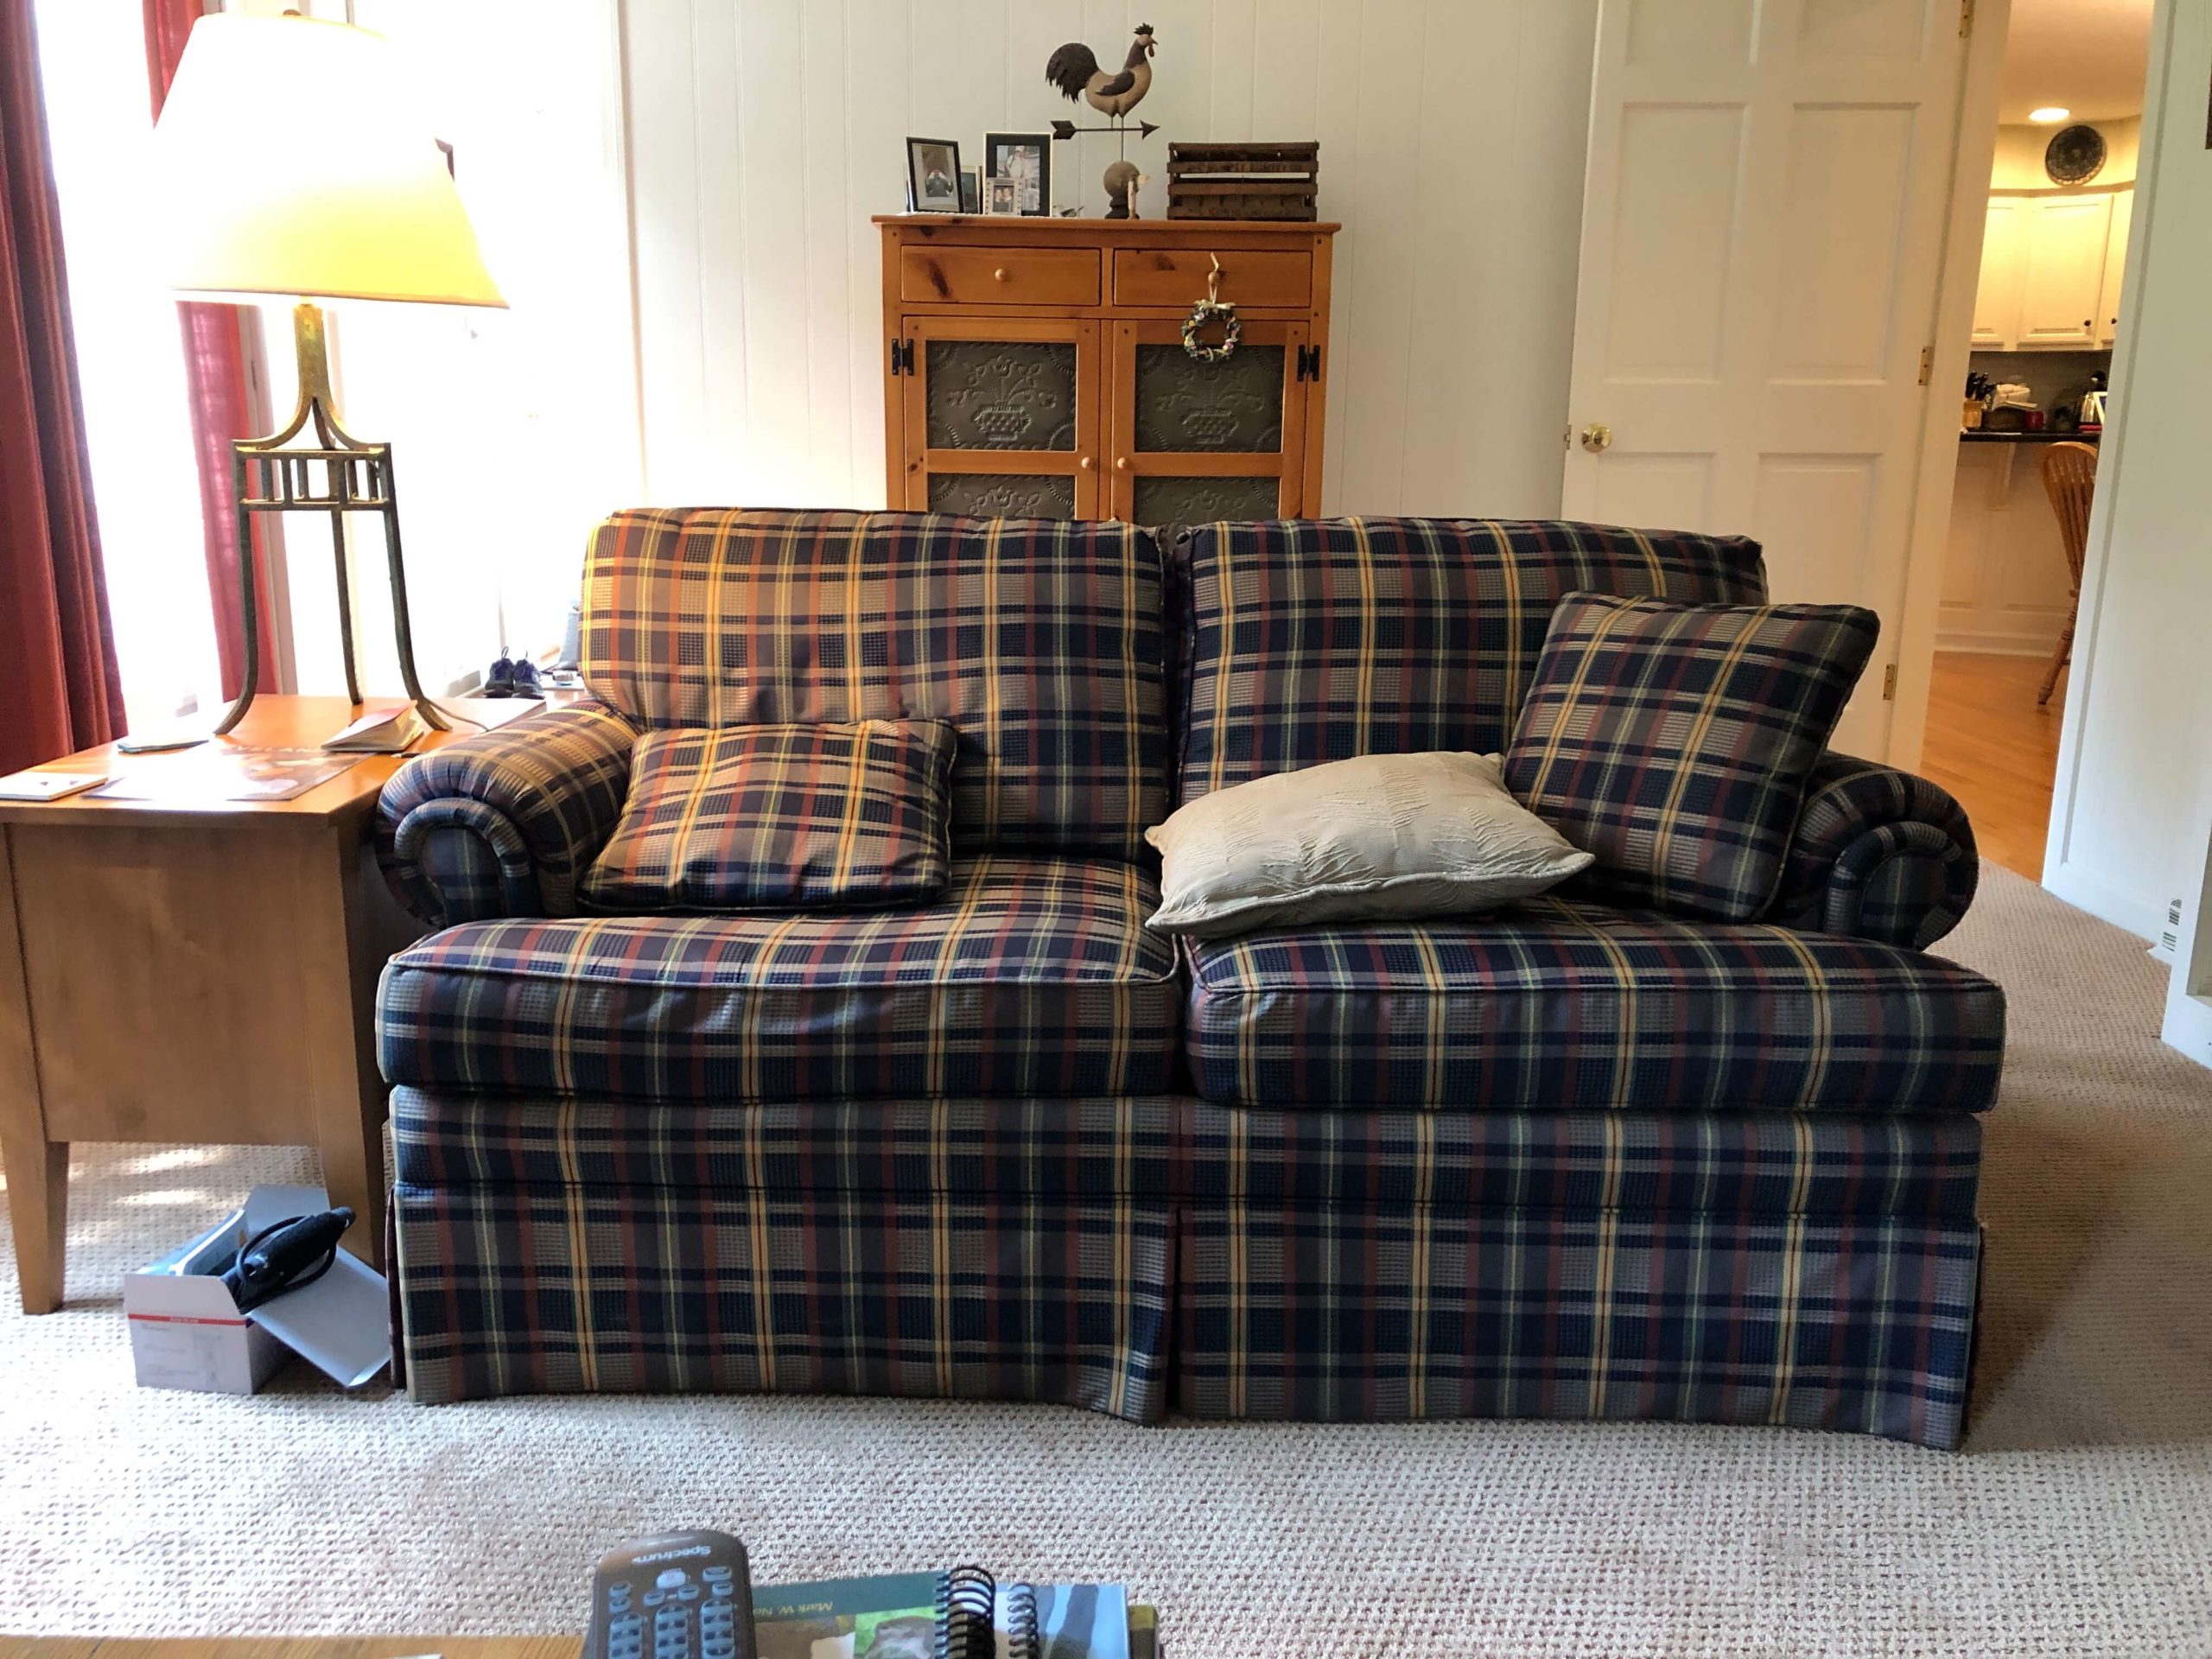 roll arm sofa frame and cushions are in great shape, but the upholstery has seen better decades